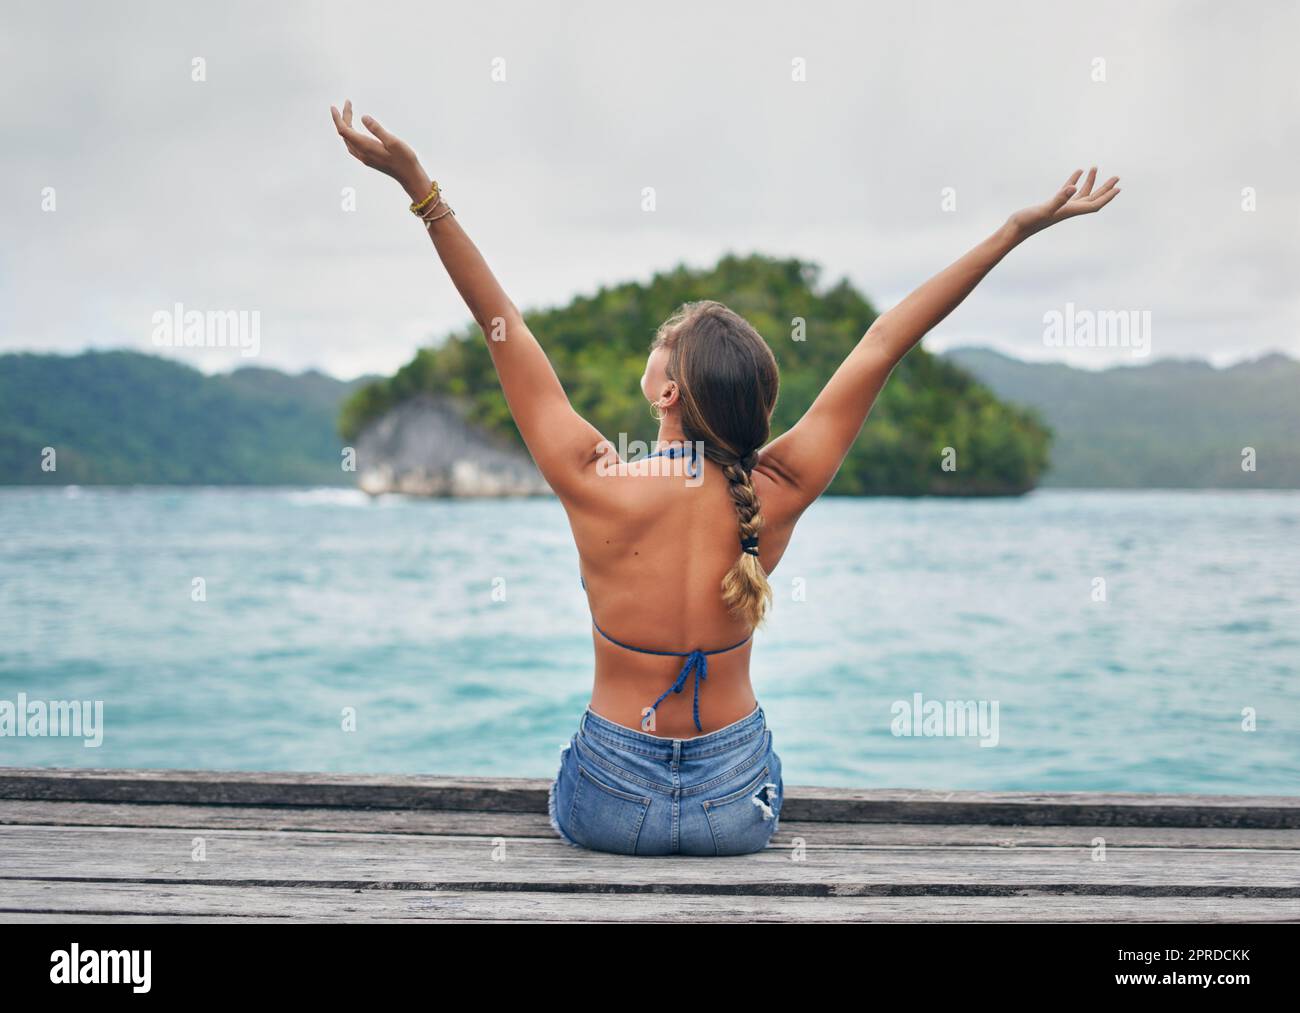 In the end, we only regret vacations not taken. Rearview shot of an unrecognizable woman sitting with her arms raised on a boardwalk overlooking the sea during vacation. Stock Photo